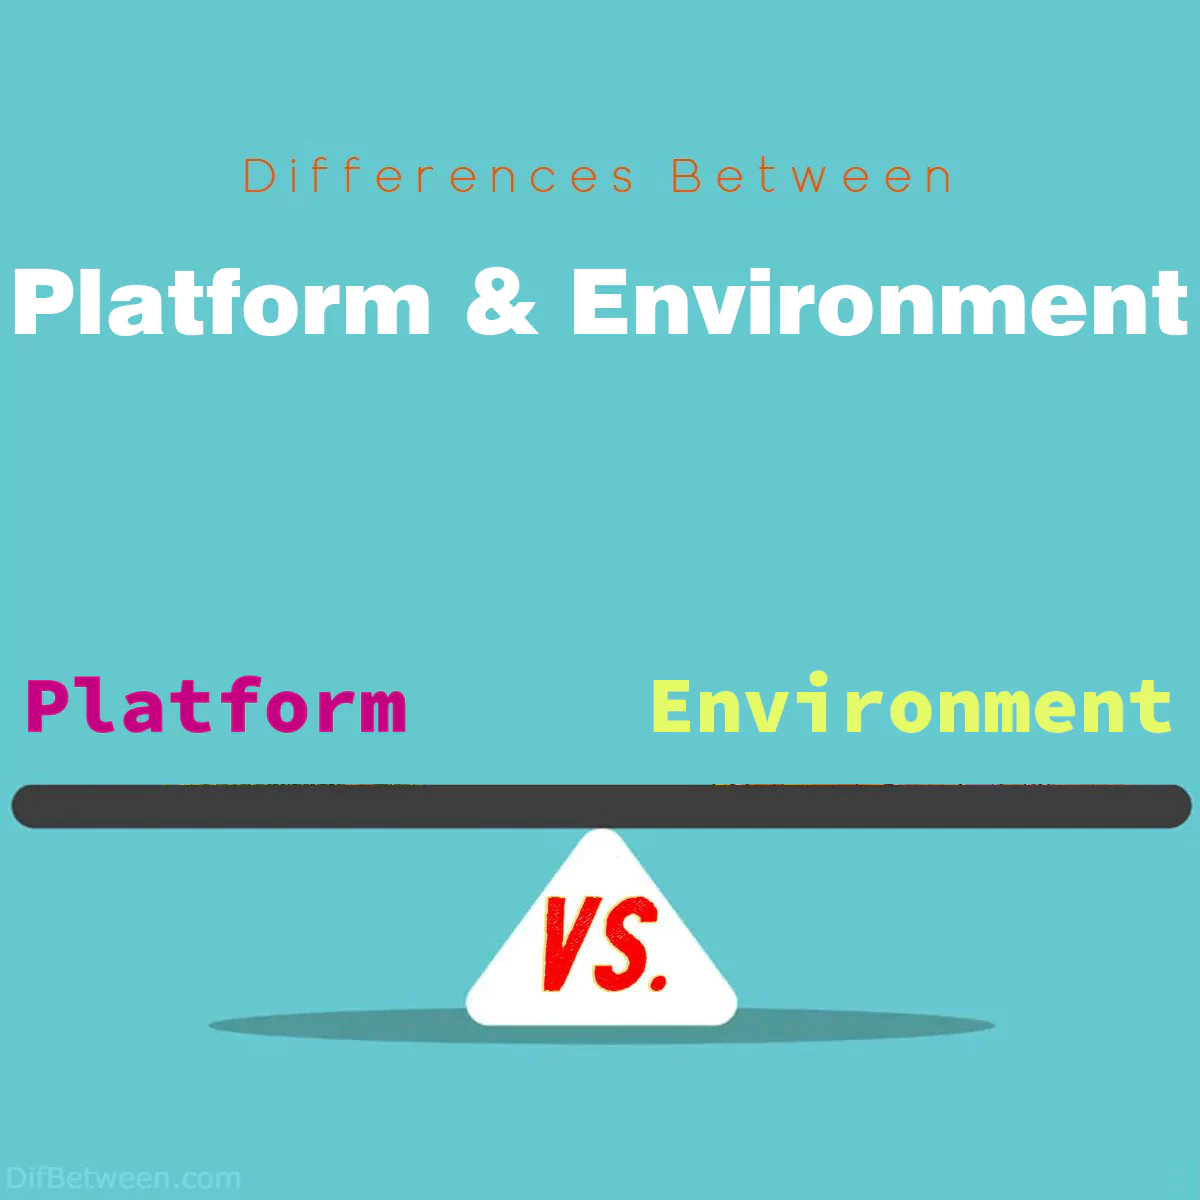 Differences Between Platform and Environment